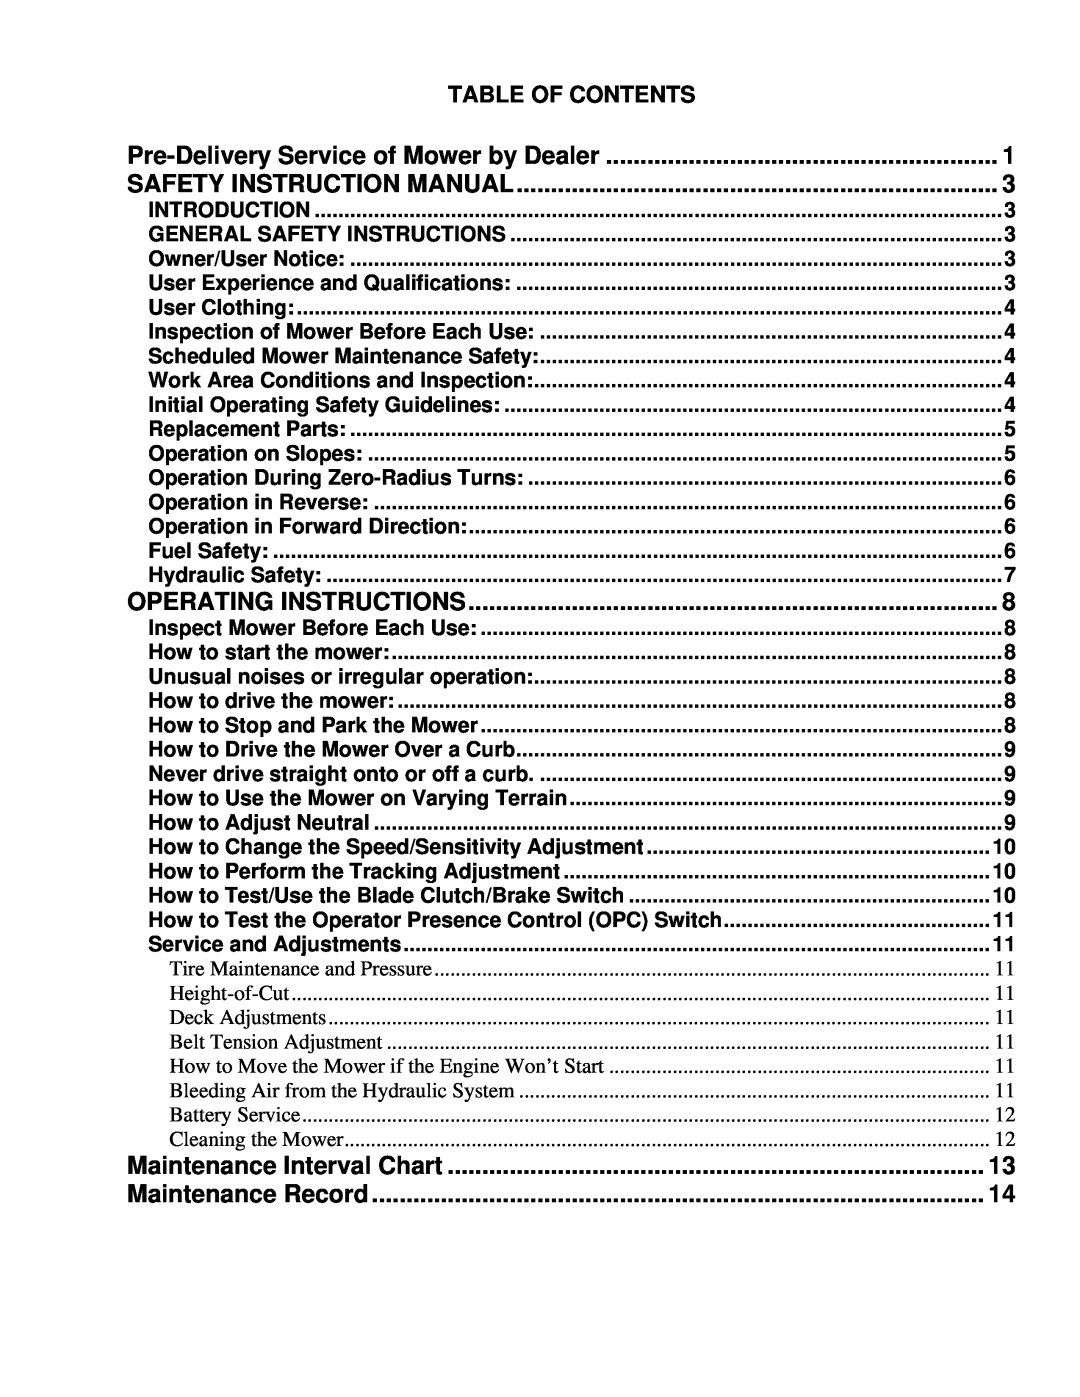 Wright Manufacturing 26980 Table Of Contents, Operating Instructions, Maintenance Interval Chart, Maintenance Record 